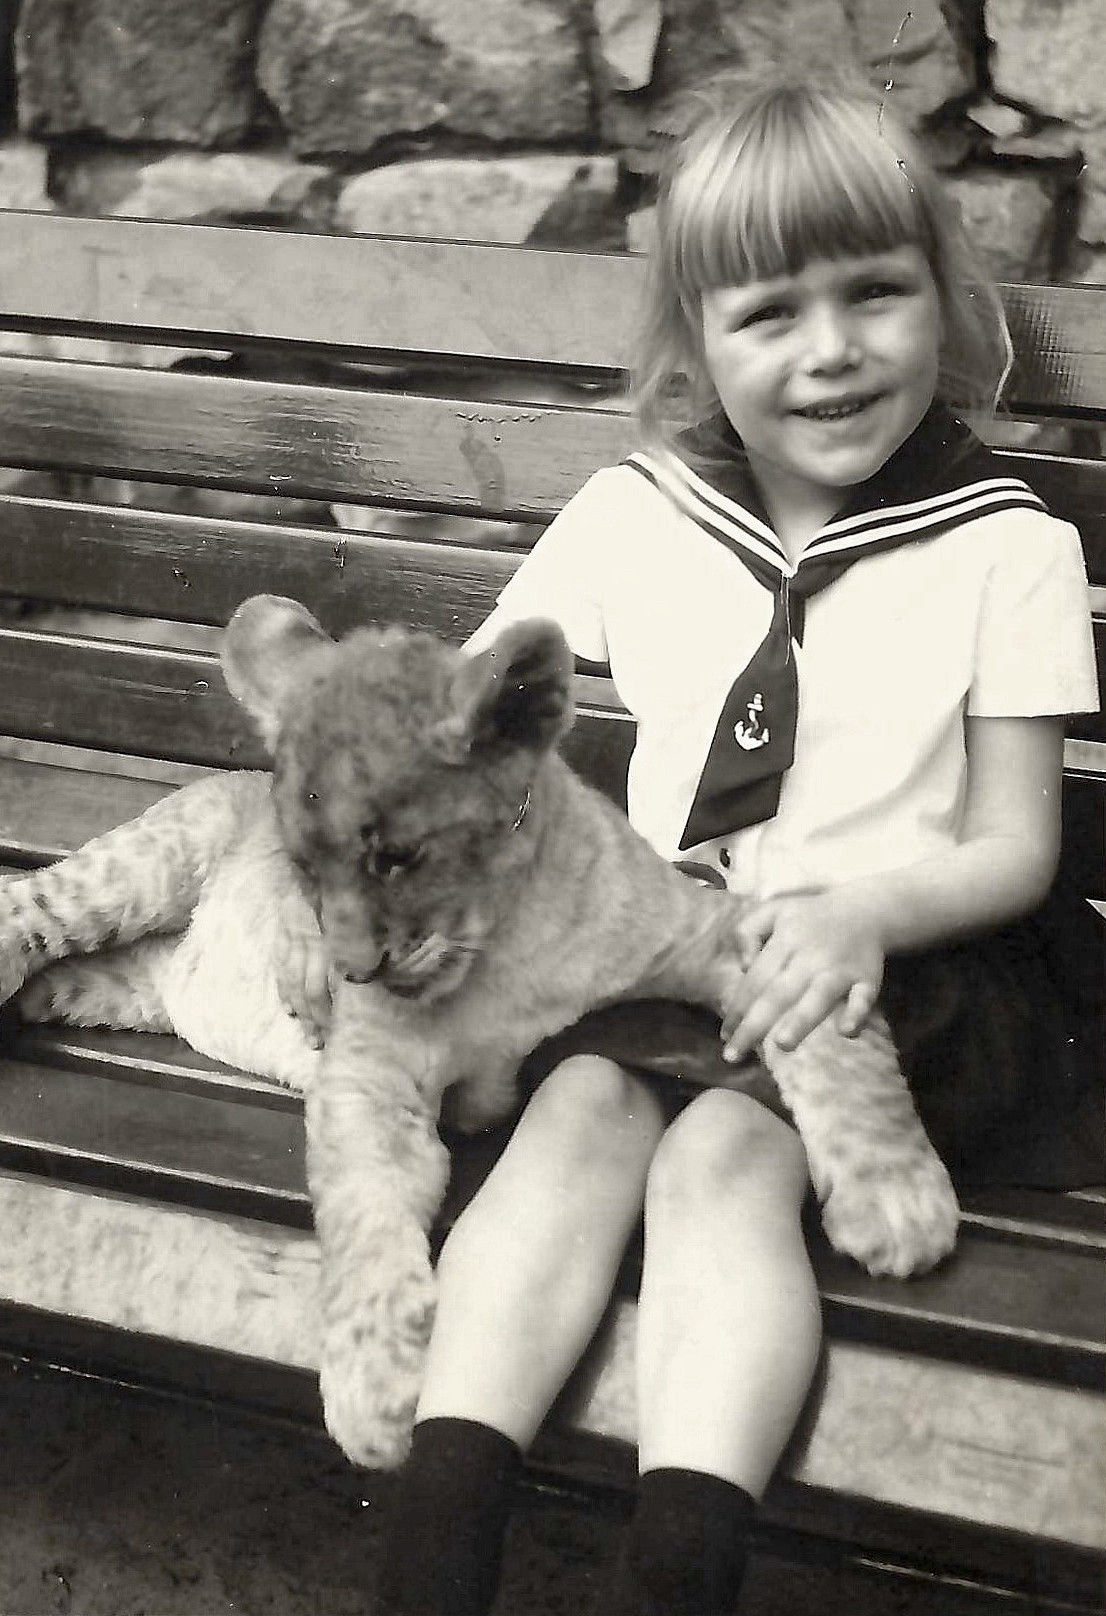 A girl sits smiling on a bench holding a lion cub in her arms.